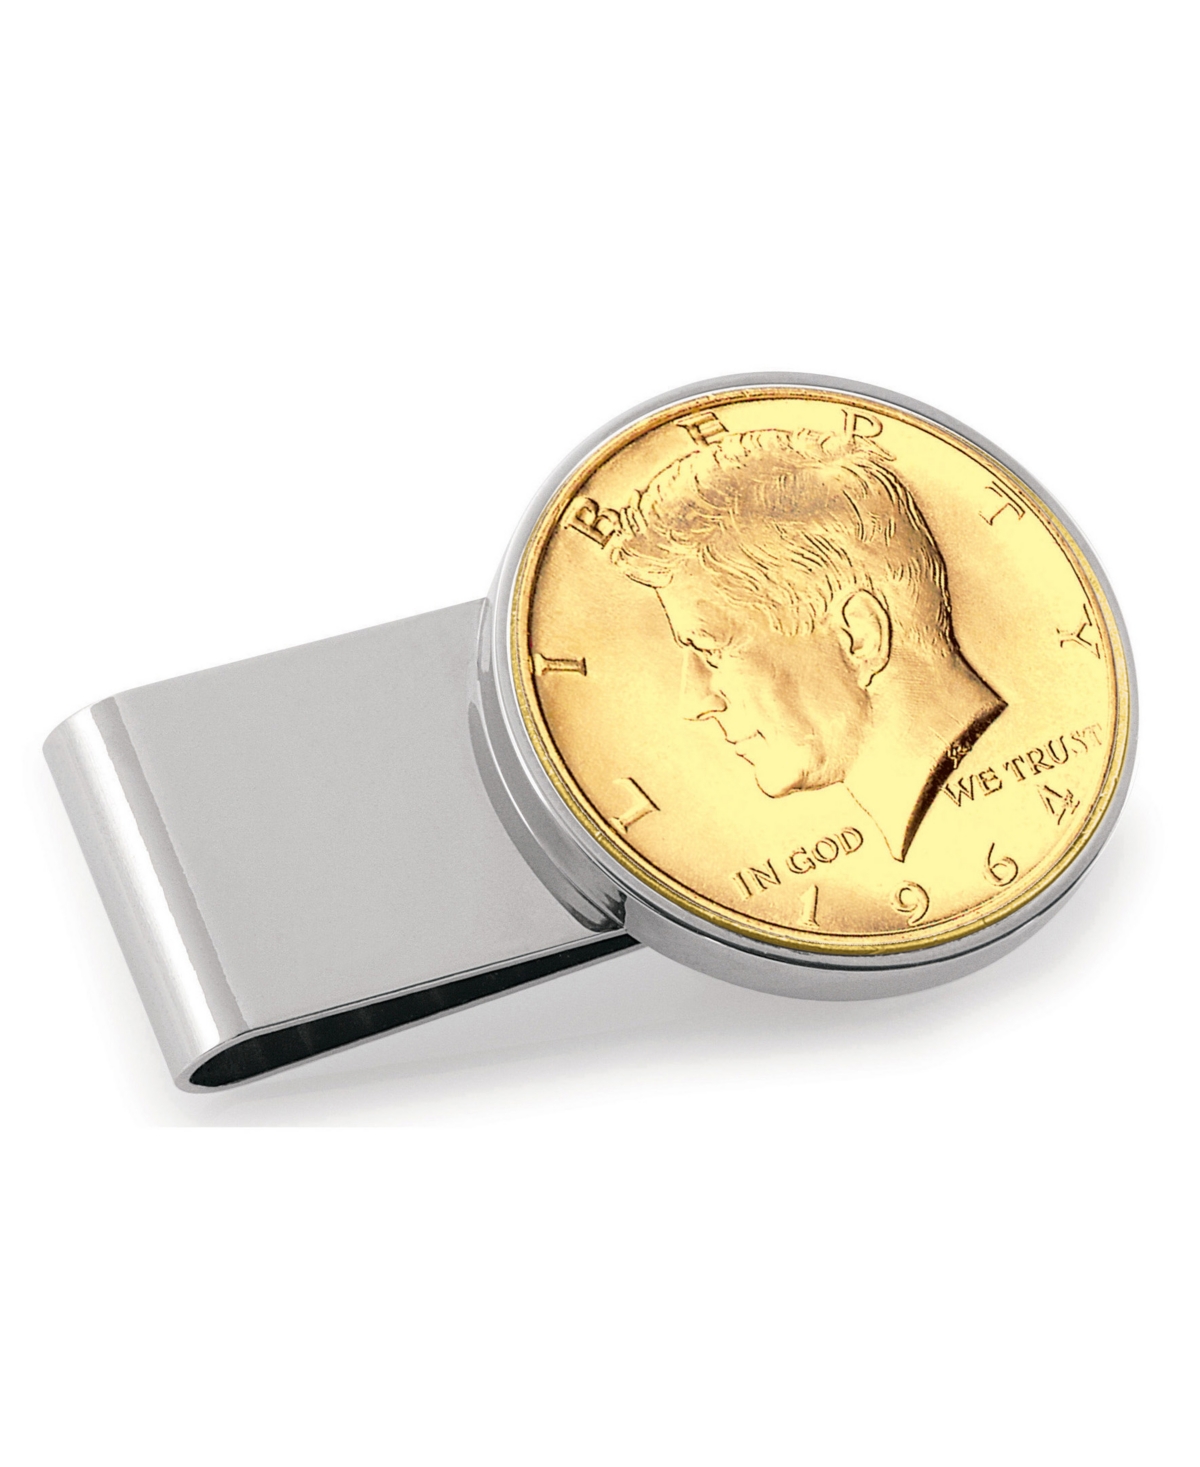 Men's American Coin Treasures Gold-Layered Jfk 1964 First Year of Issue Half Dollar Stainless Steel Coin Money Clip - Silver